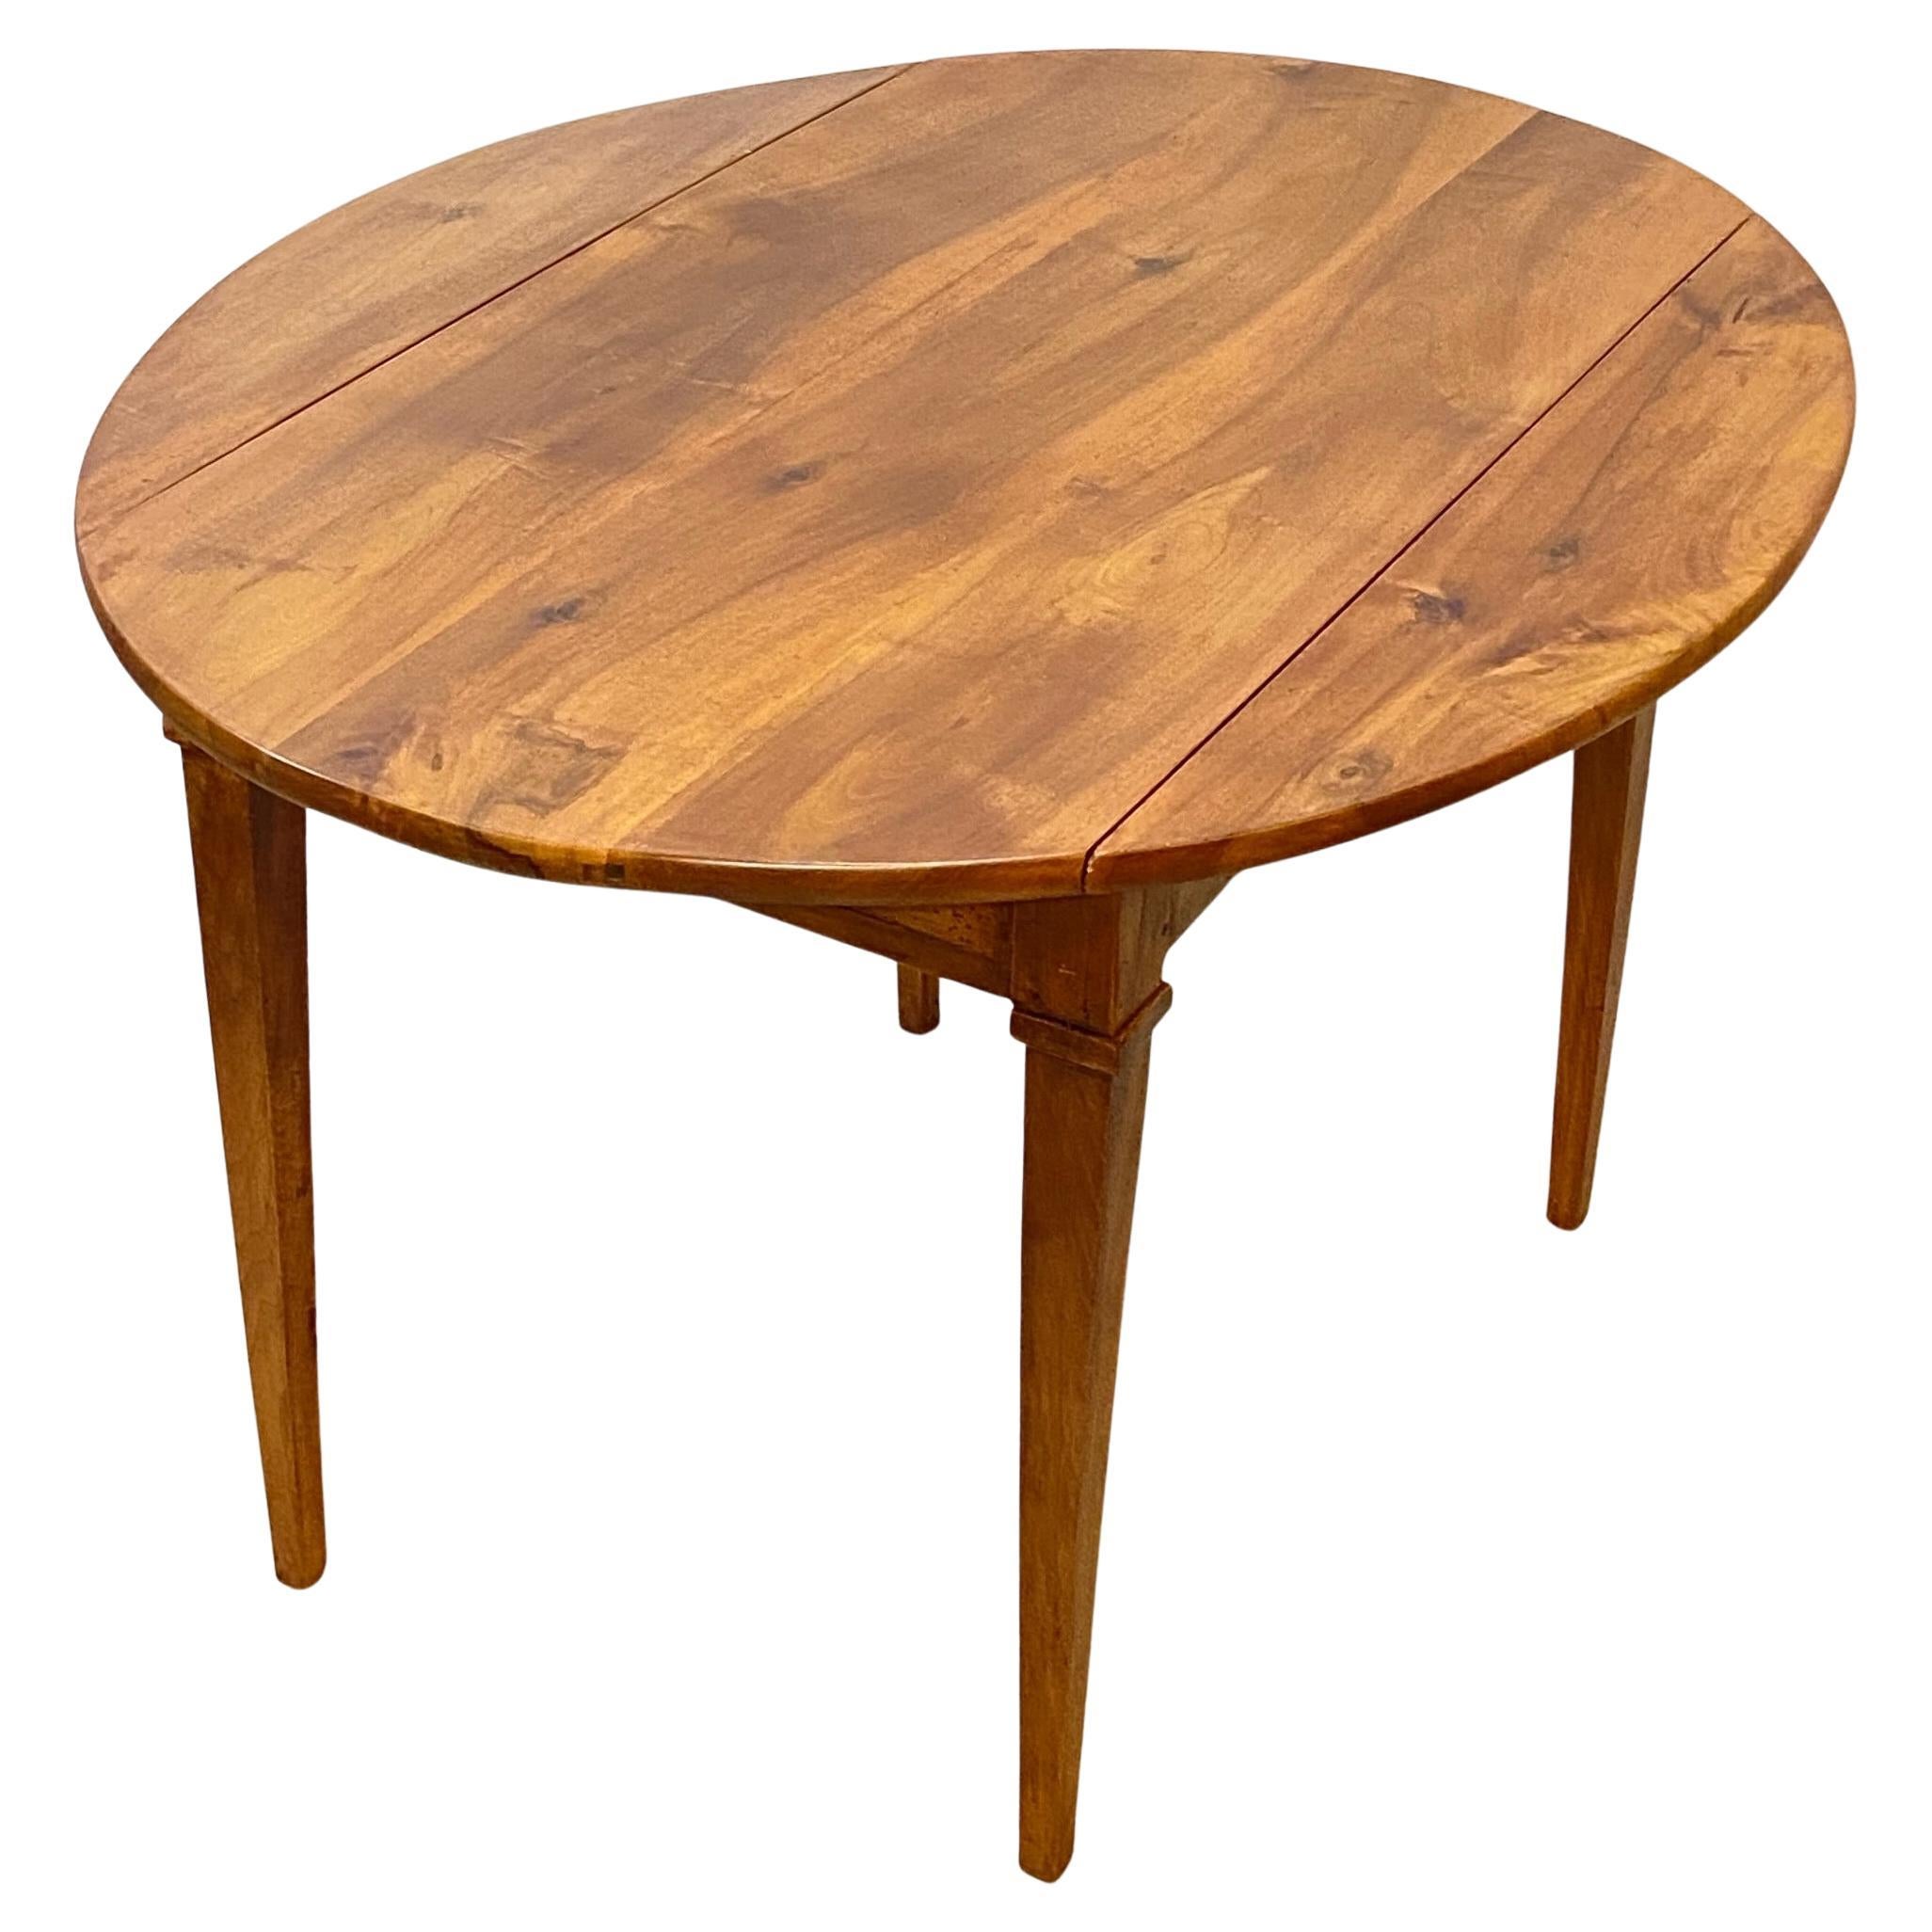 Early 19th C French Cherry Wood Elliptical Drop Leaf Dining Table, circa 1800 For Sale